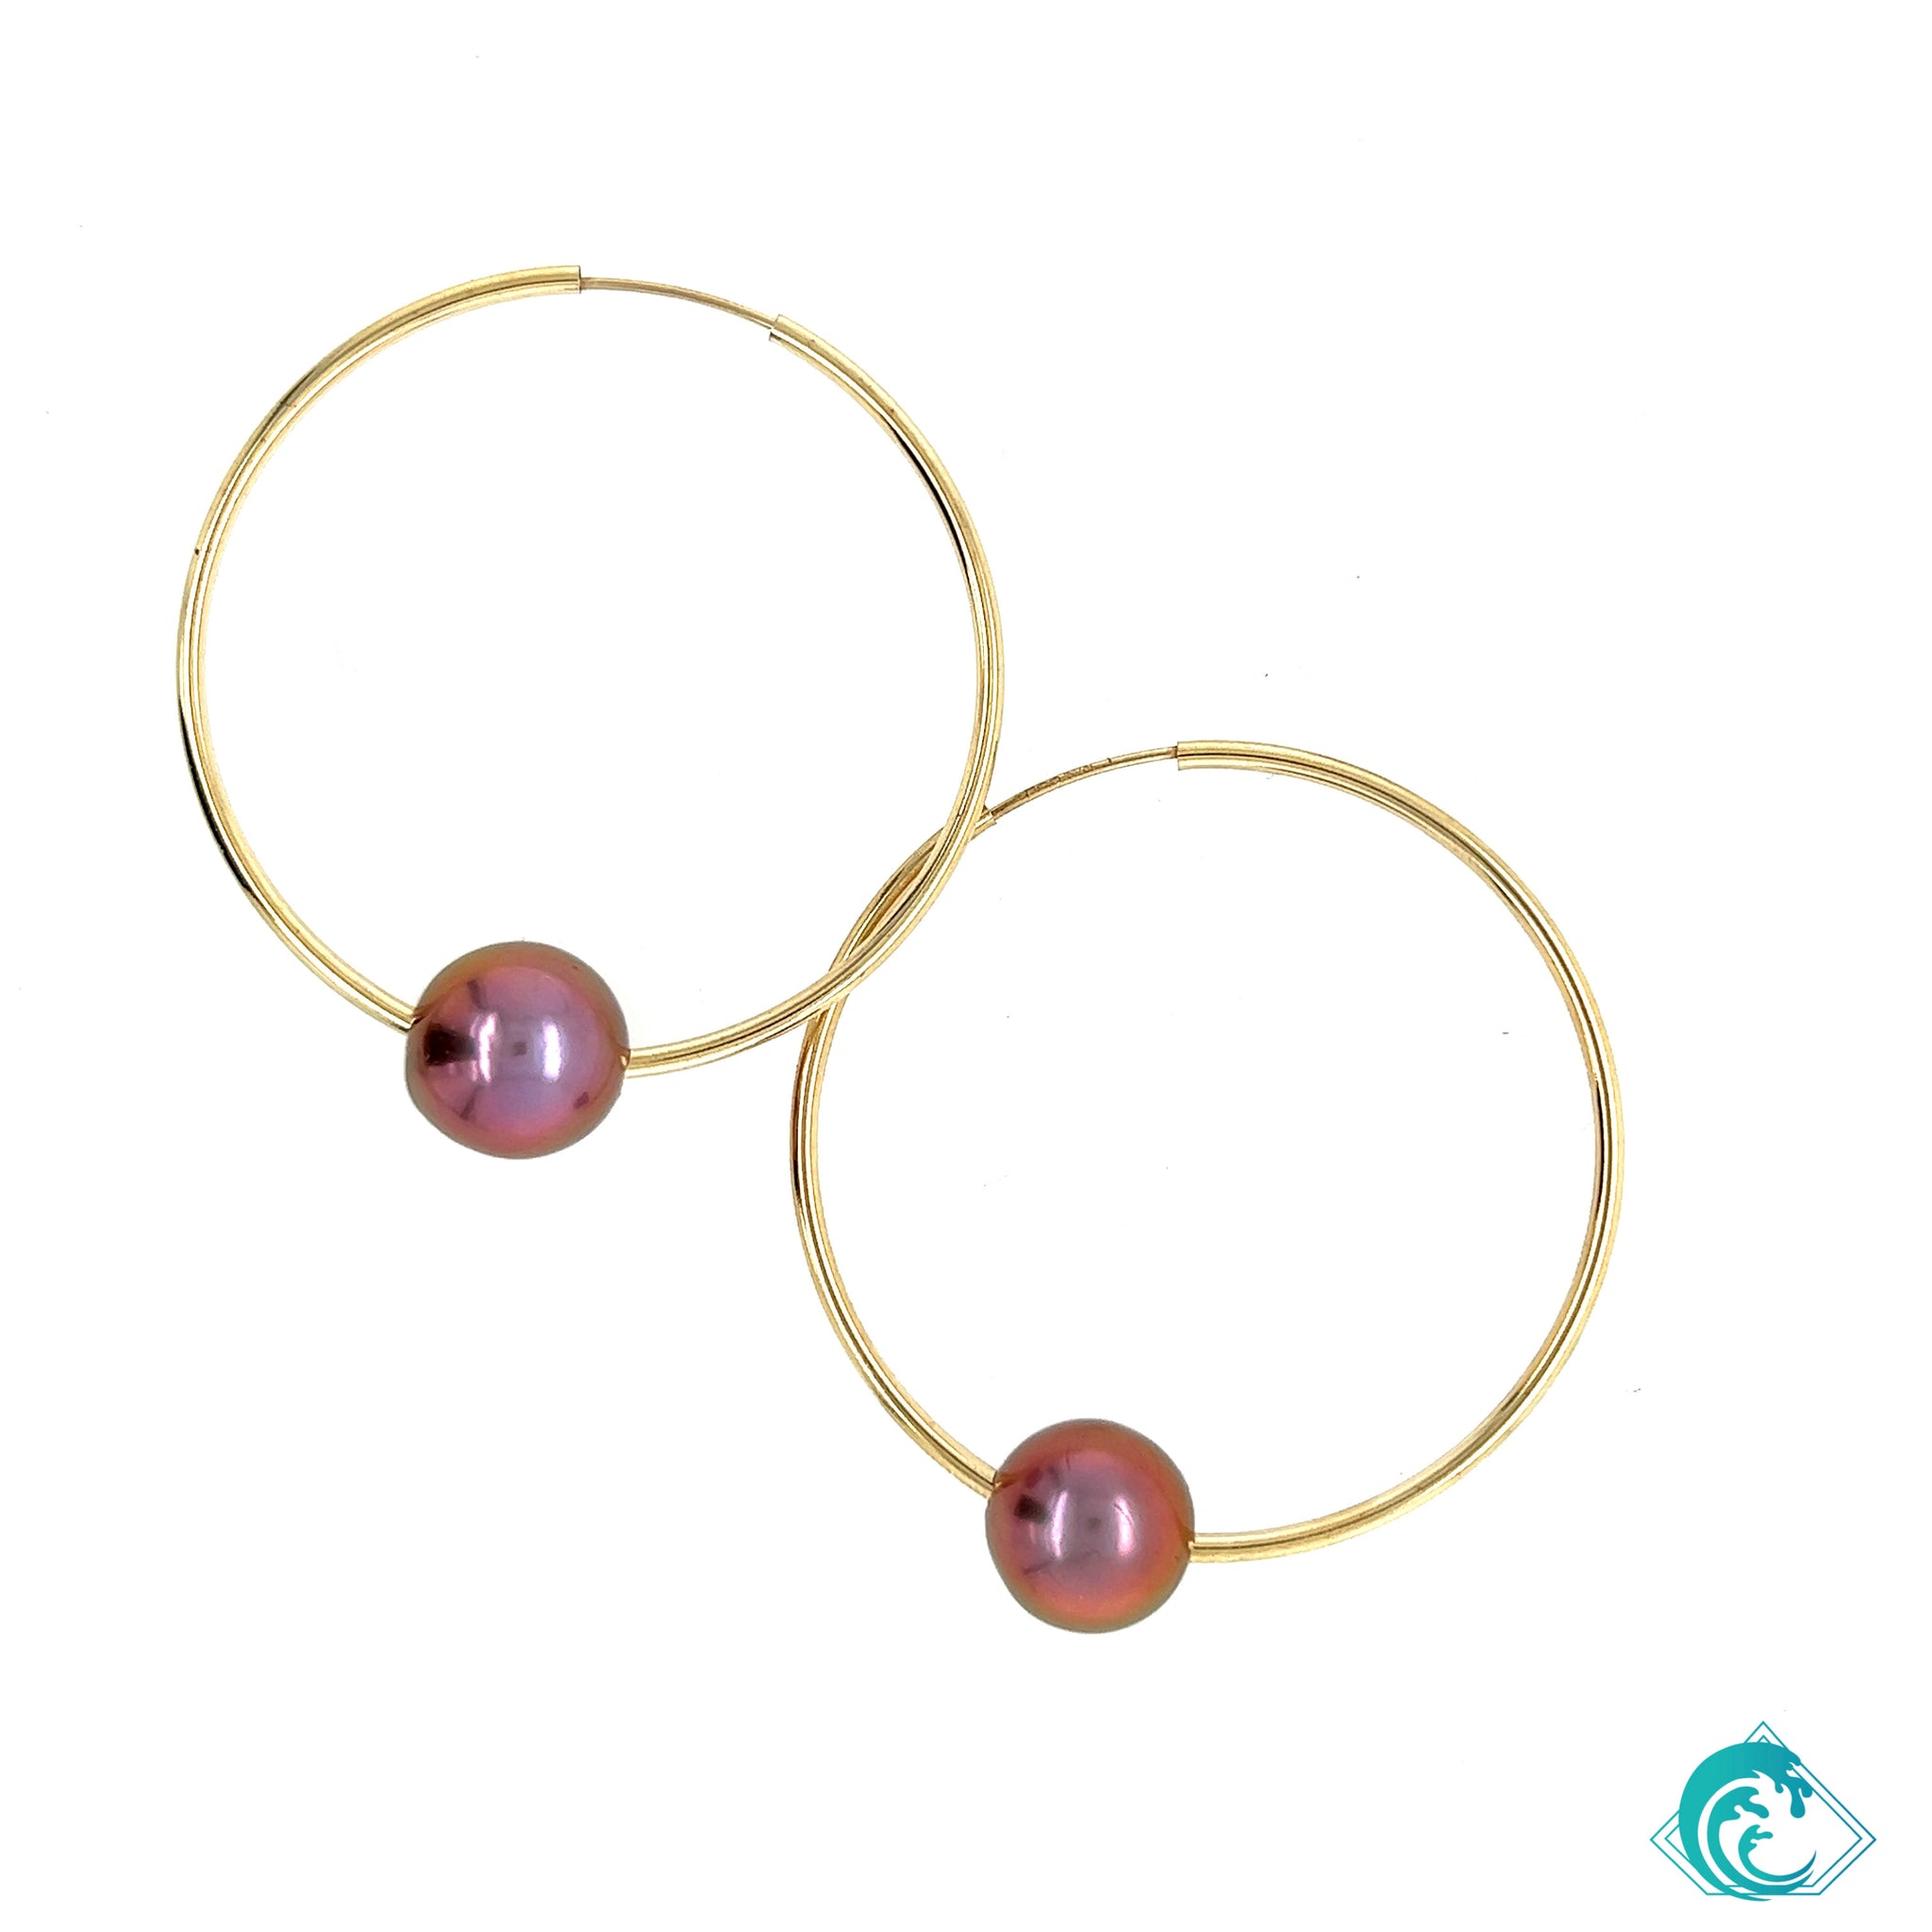 Gold Filled Endless Hoops with Pink Pearls